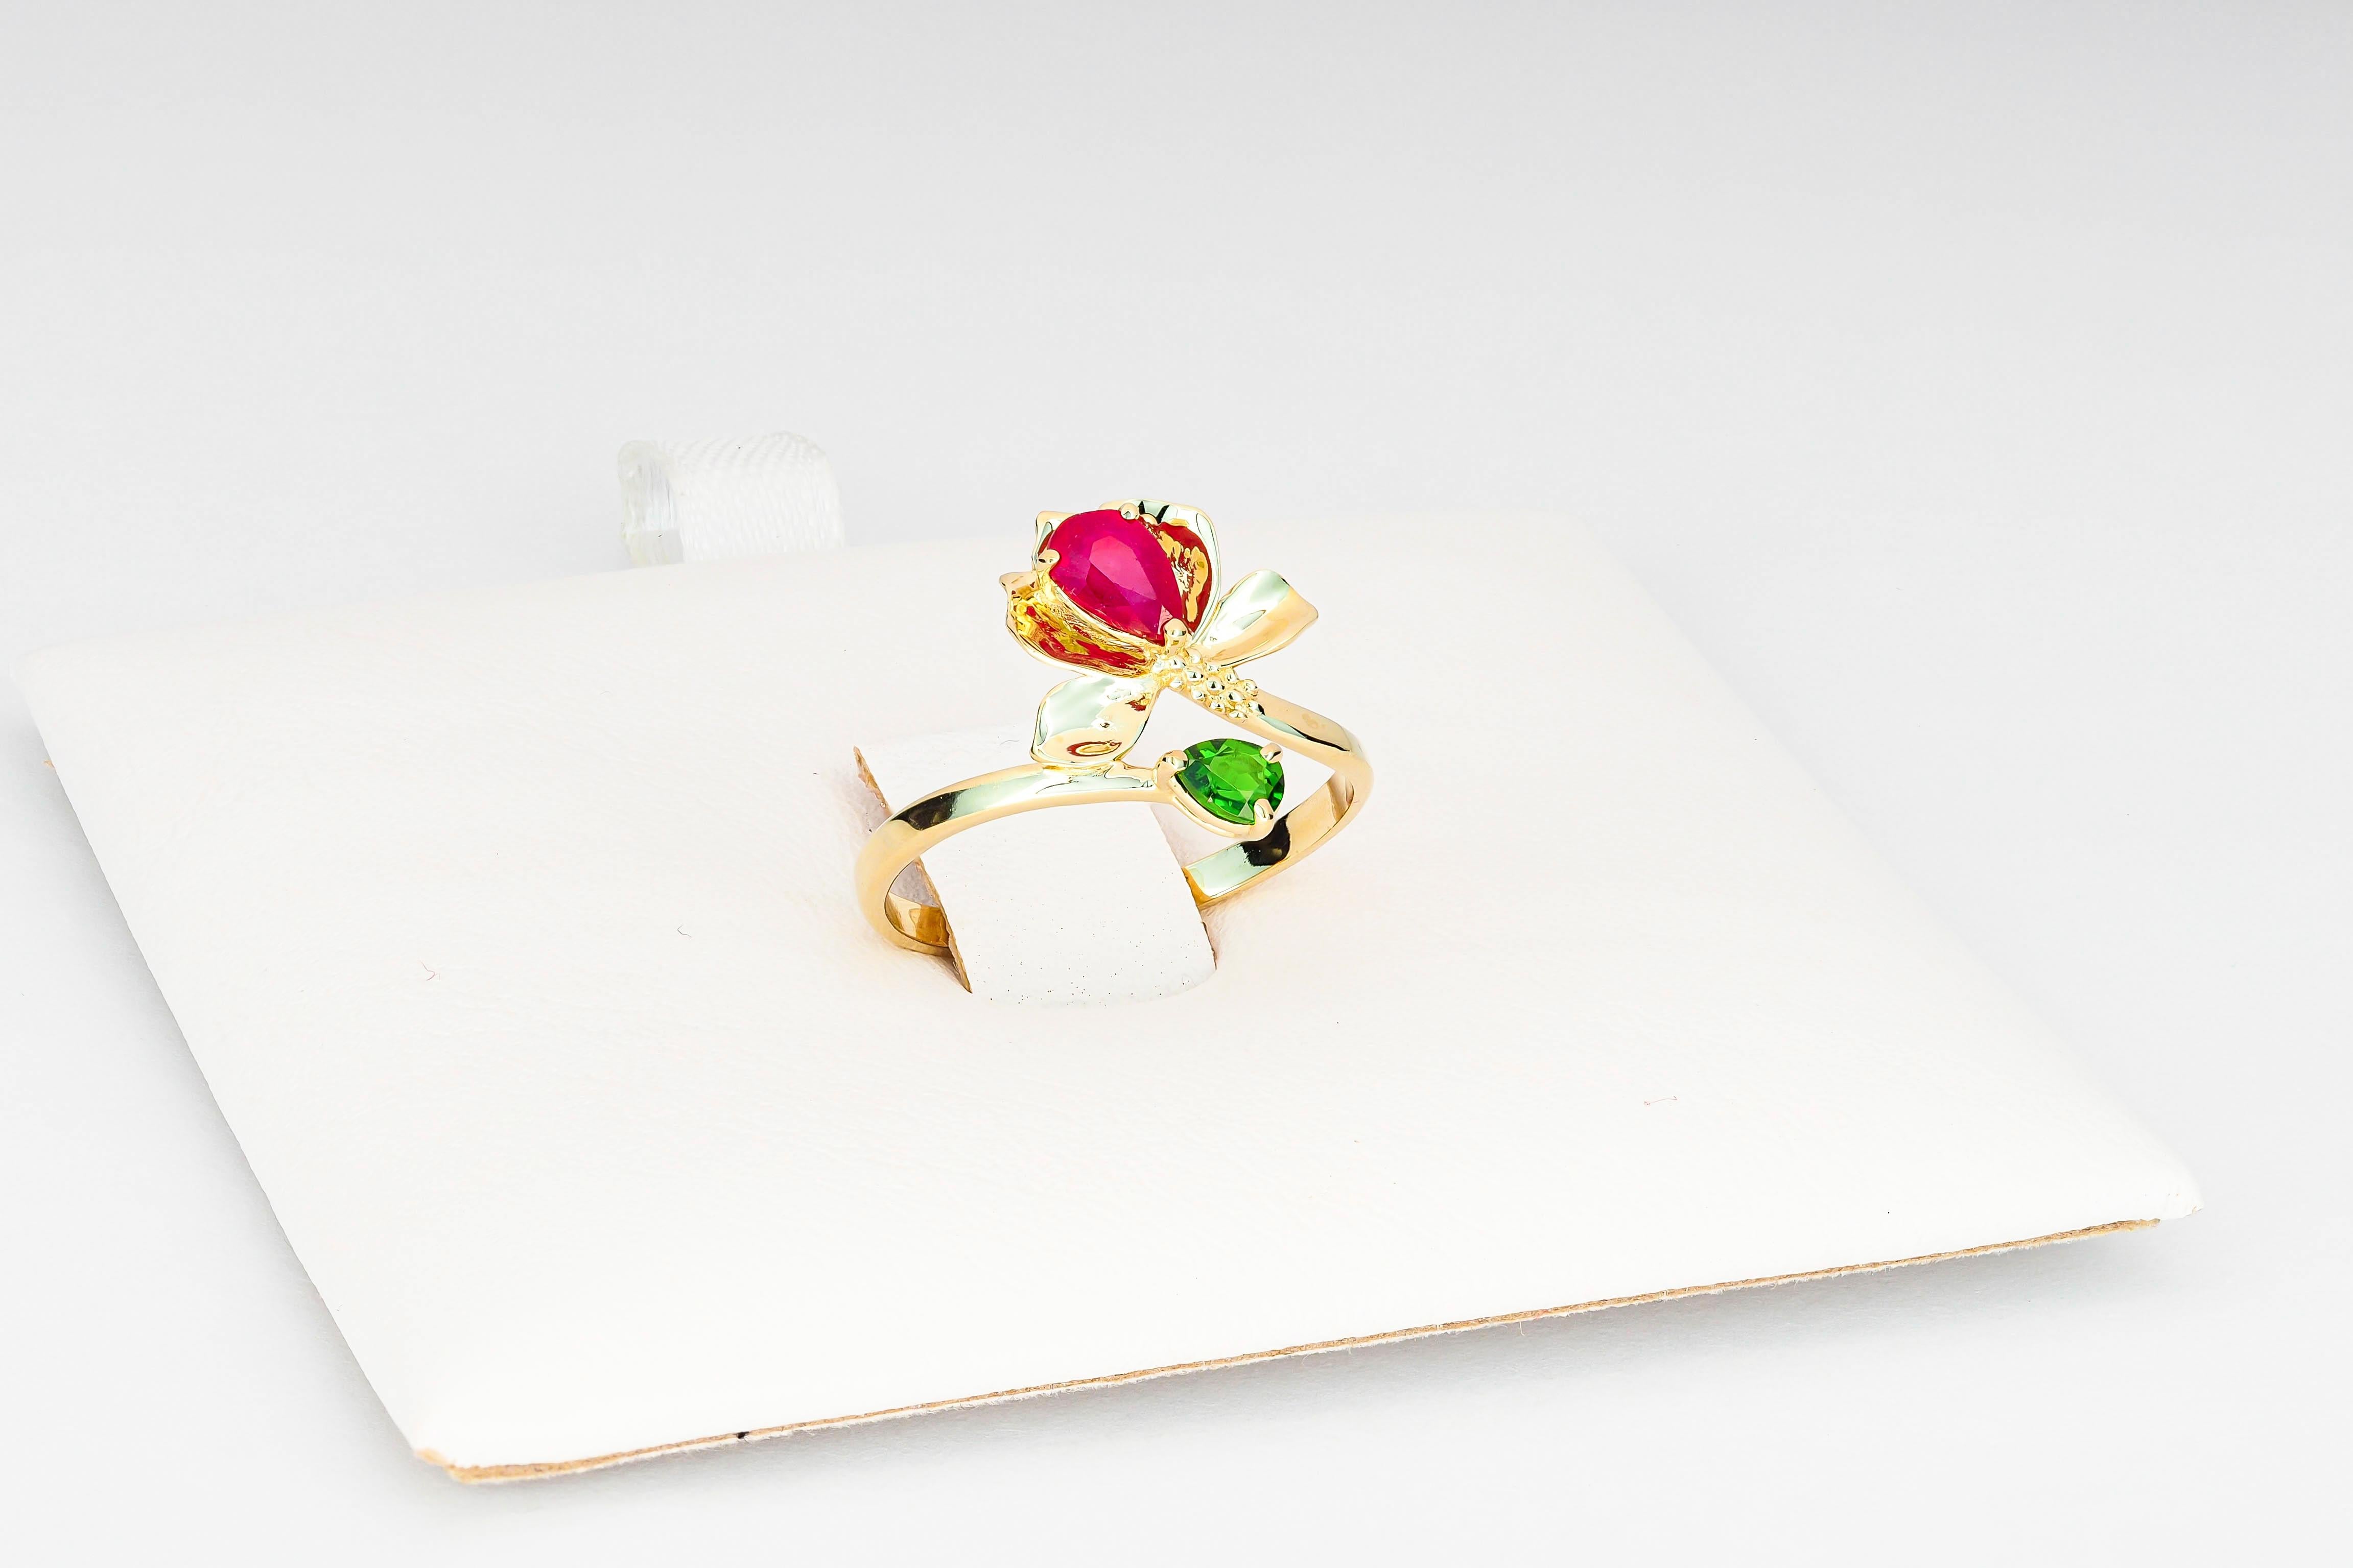 For Sale:  14 K Gold Ring with Ruby and Chrome Diopside. Water Lily Flower Gold Ring! 2